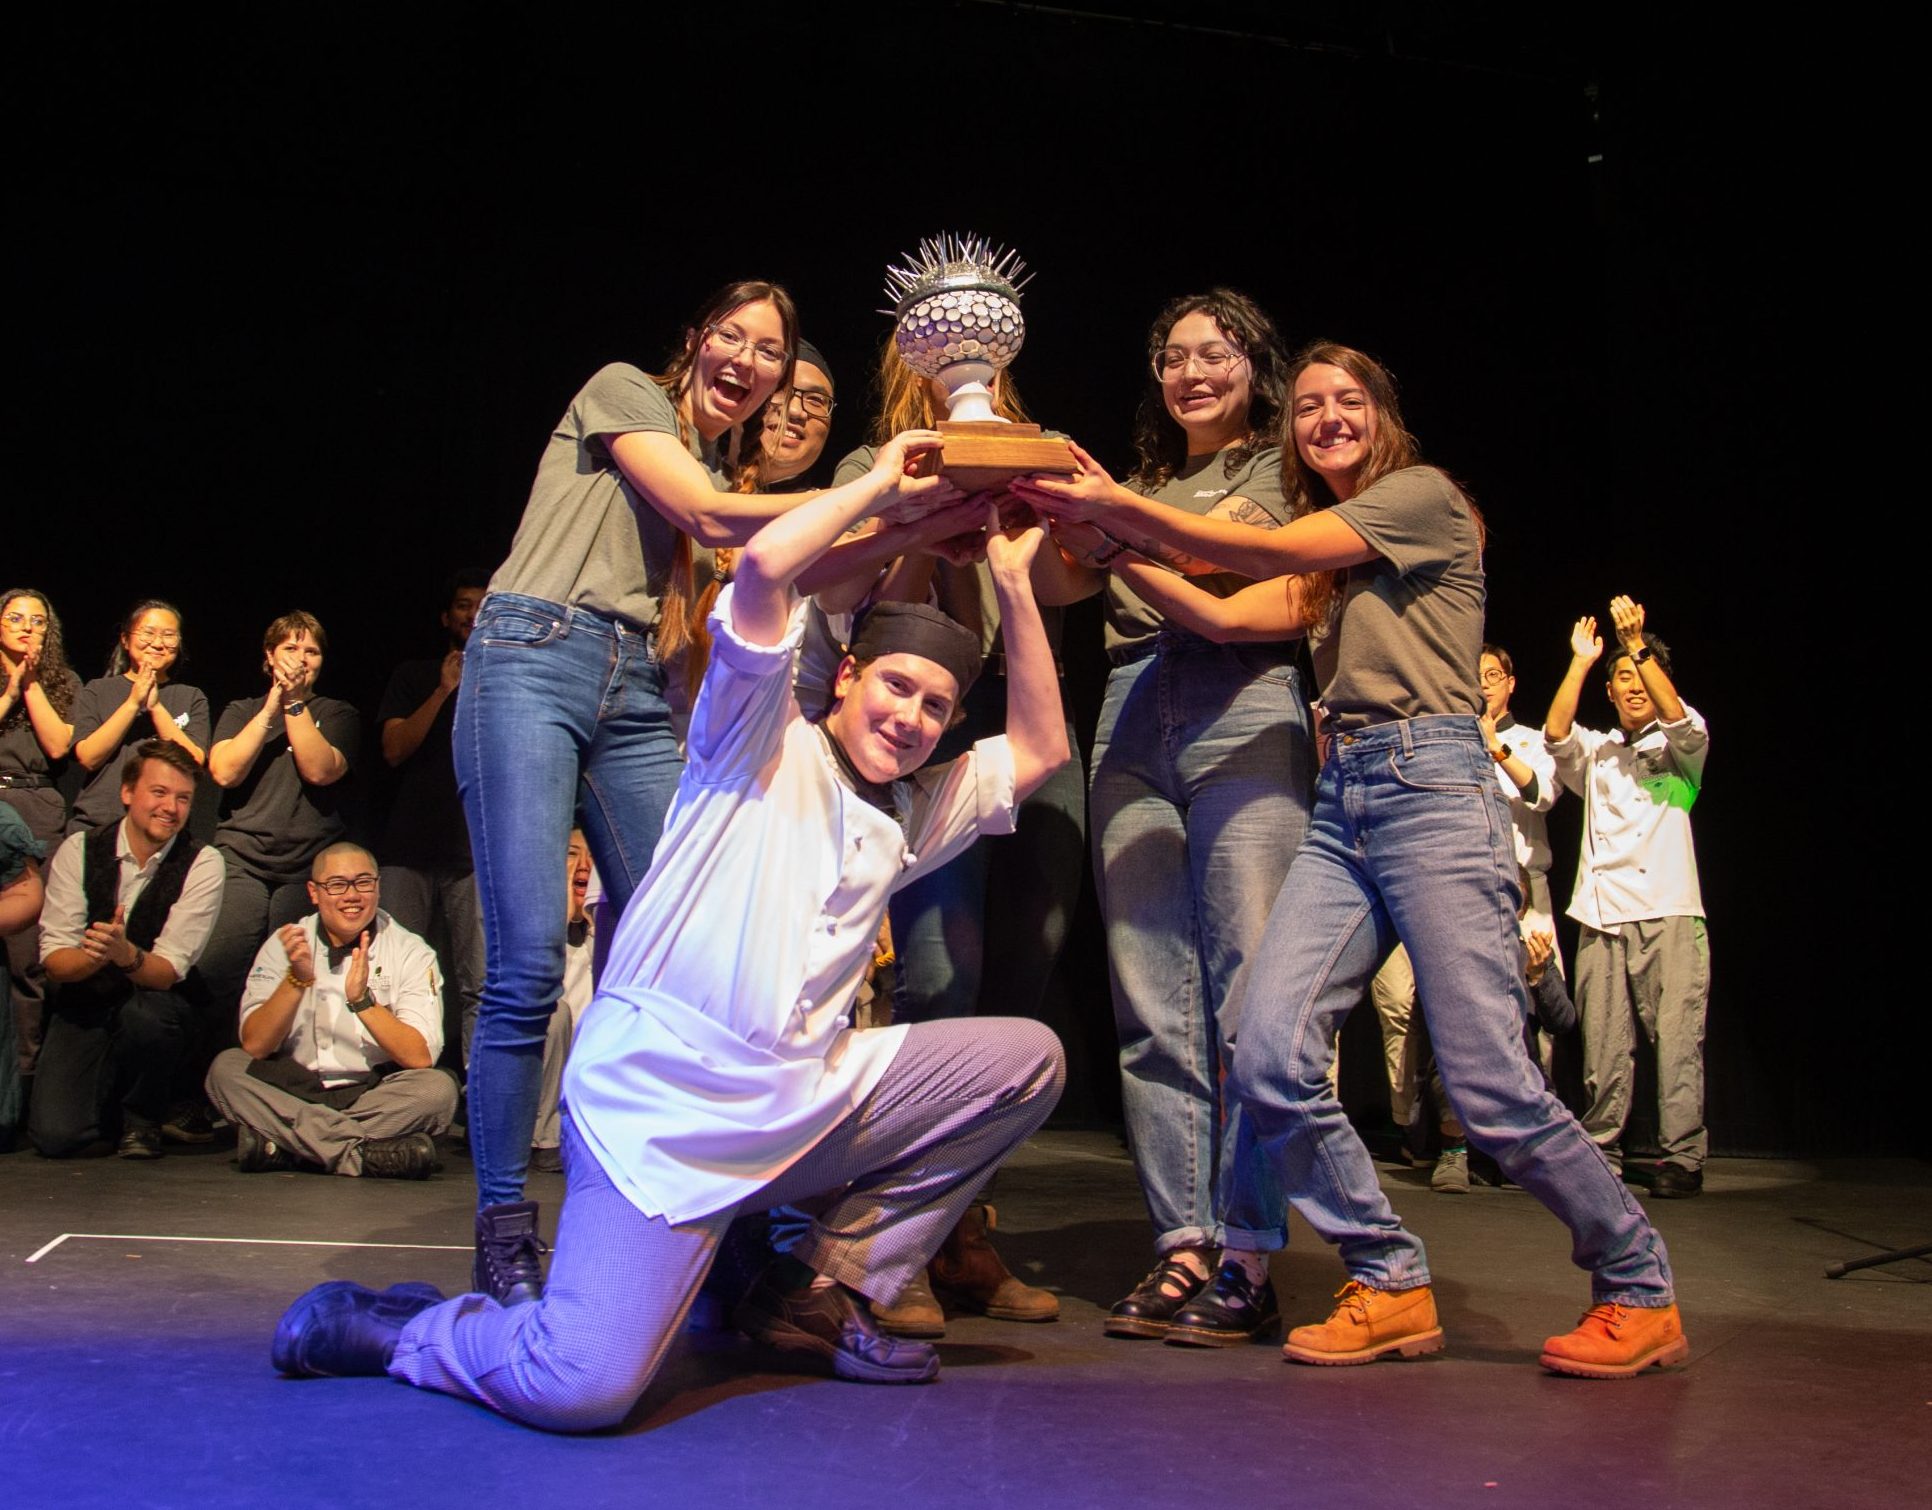 Six students holding a gray urchin-shaped trophy on stage with more students clapping behind them